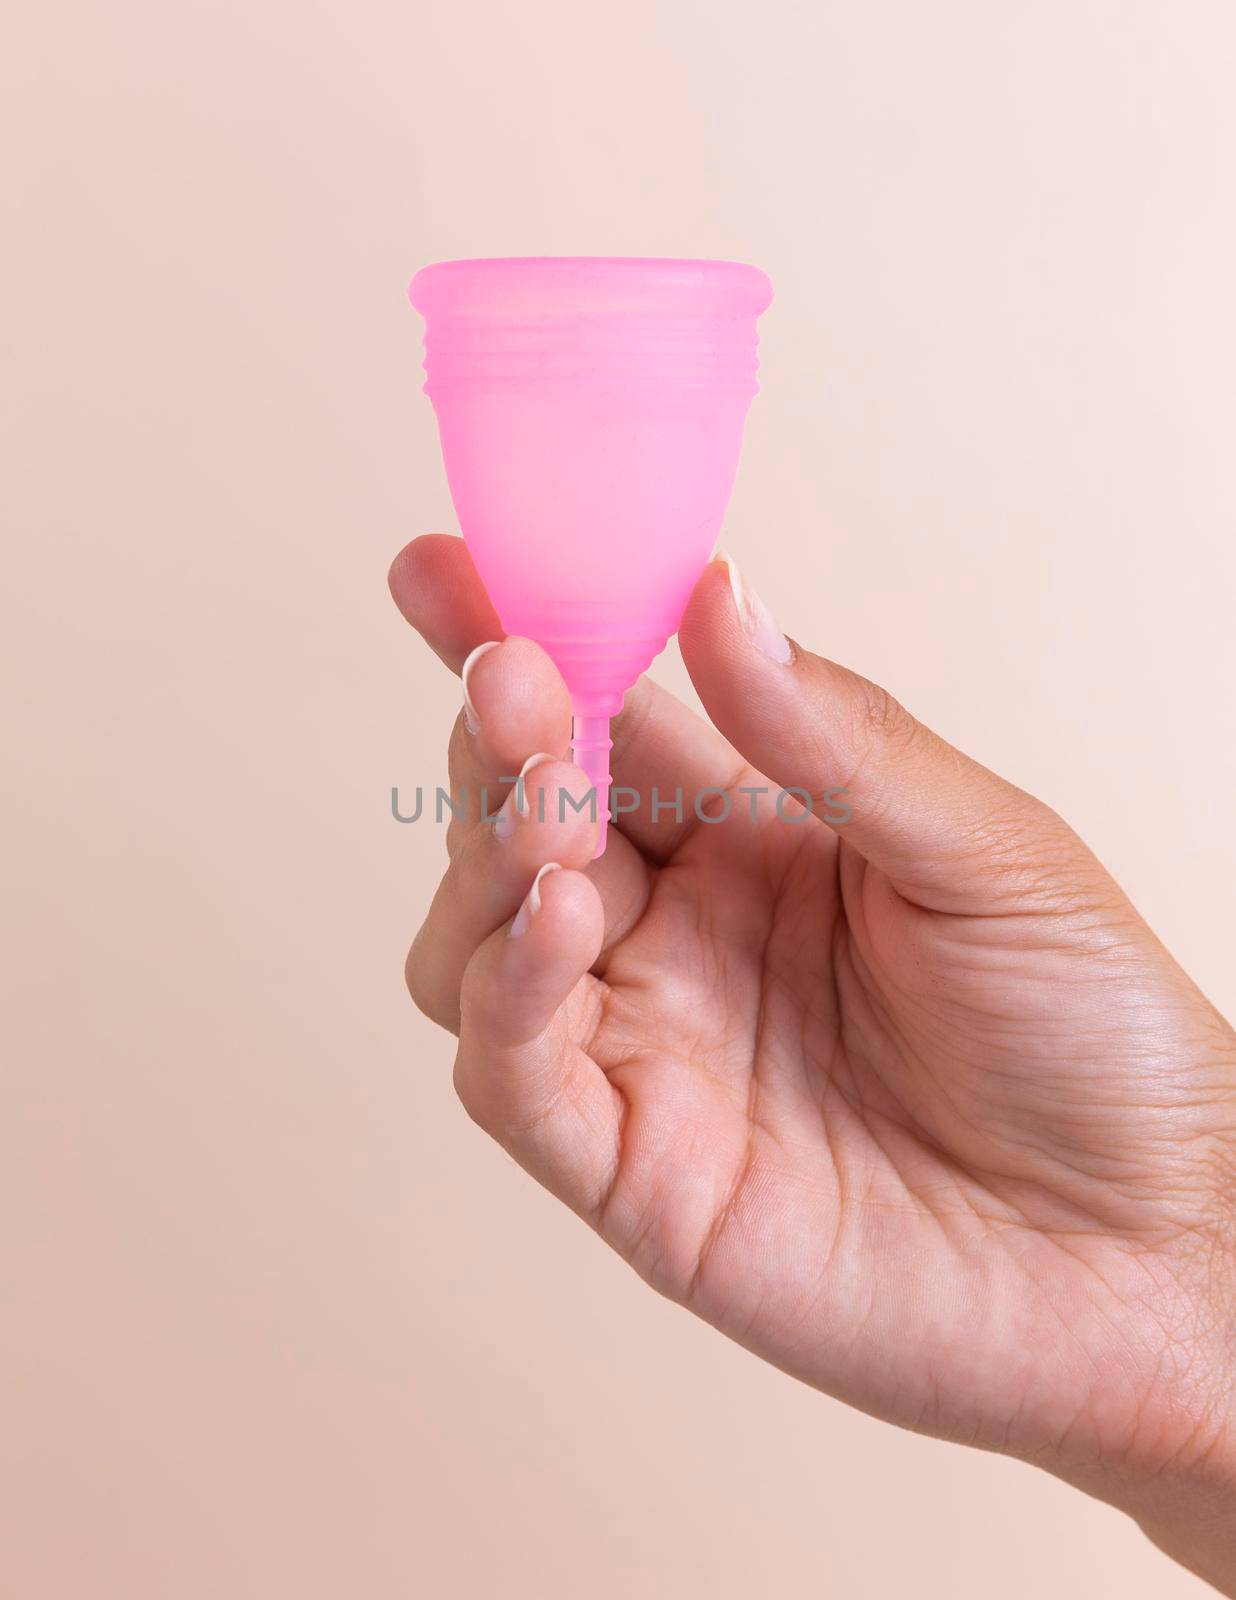 close up hand holding pink menstrual cup. High quality photo by Zahard